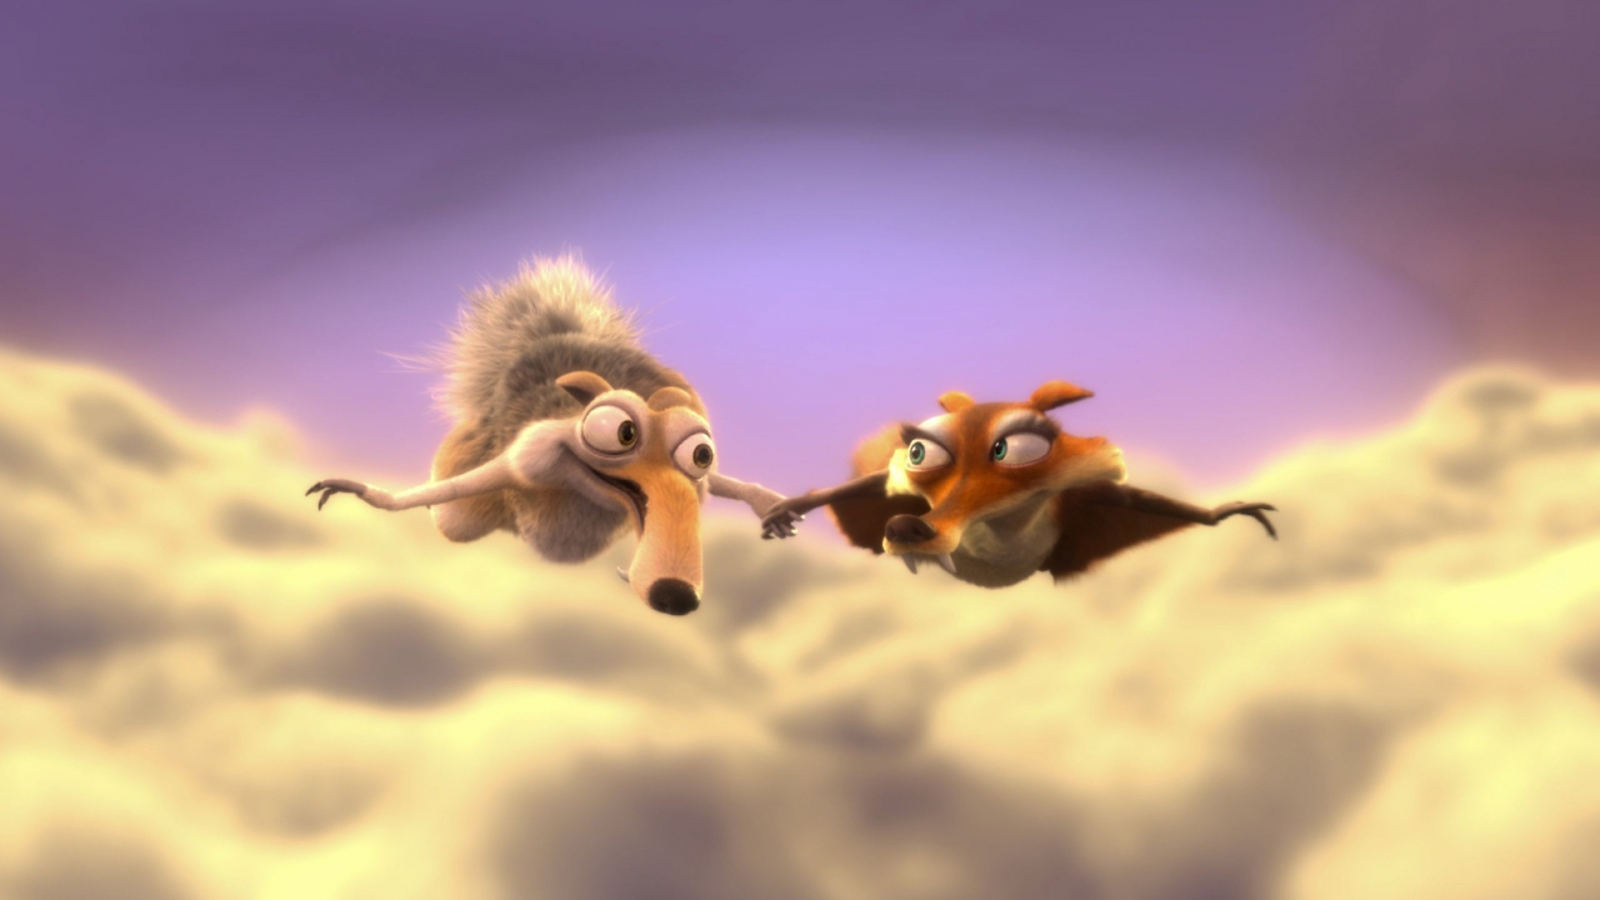 Scrat and Scratte for 1600 x 900 HDTV resolution